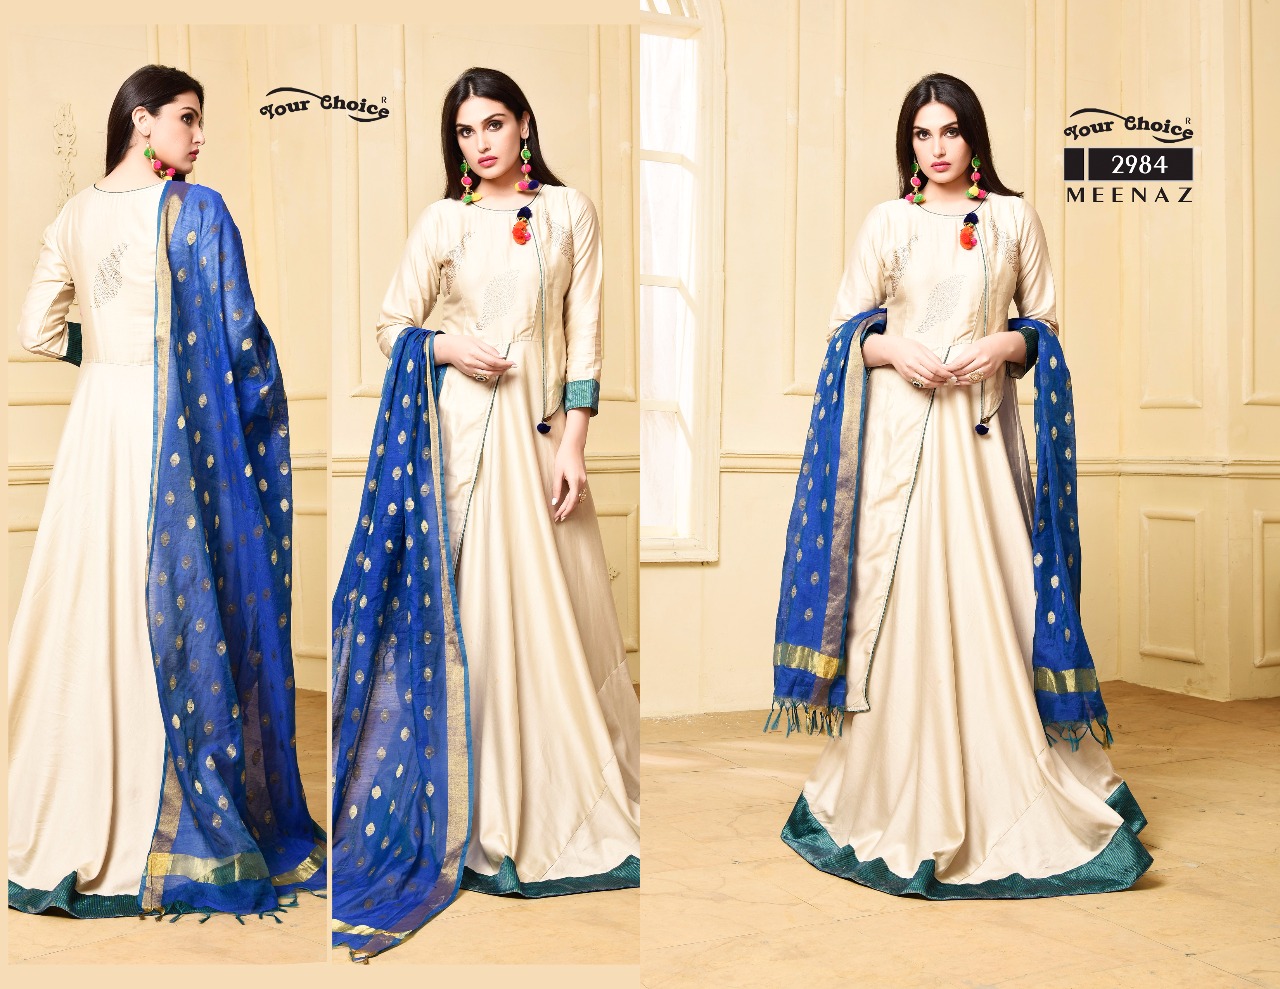 Your choice launch meenaz traditional uocoming festive season collection of gowns